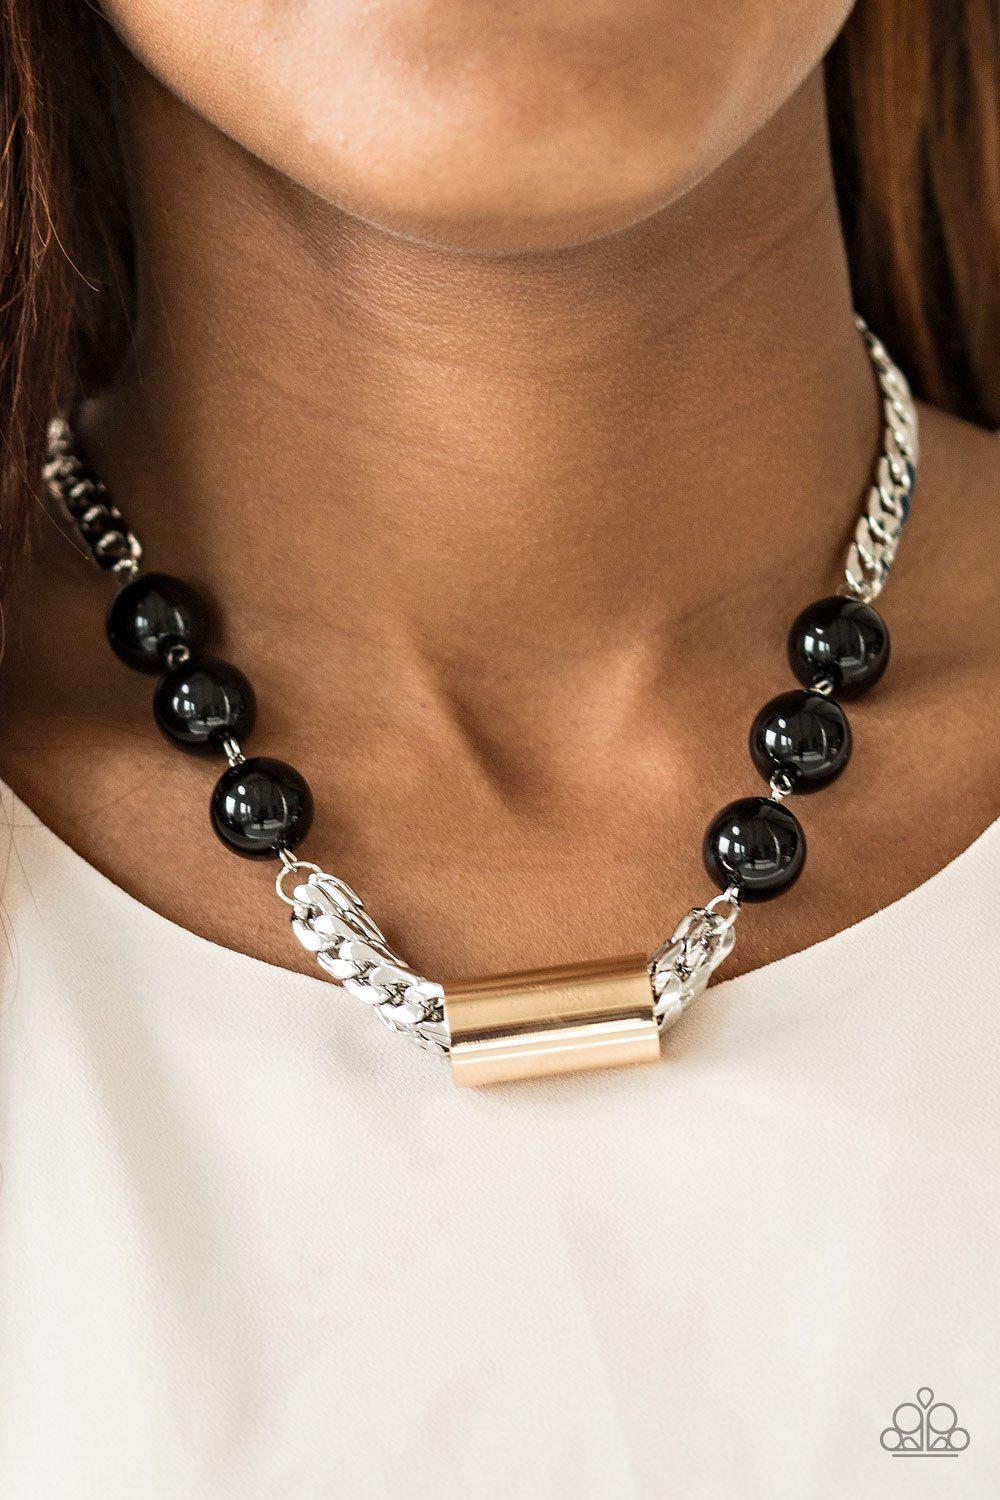 All About Attitude Silver, Gold and Black Bead Necklace - Paparazzi Accessories-CarasShop.com - $5 Jewelry by Cara Jewels